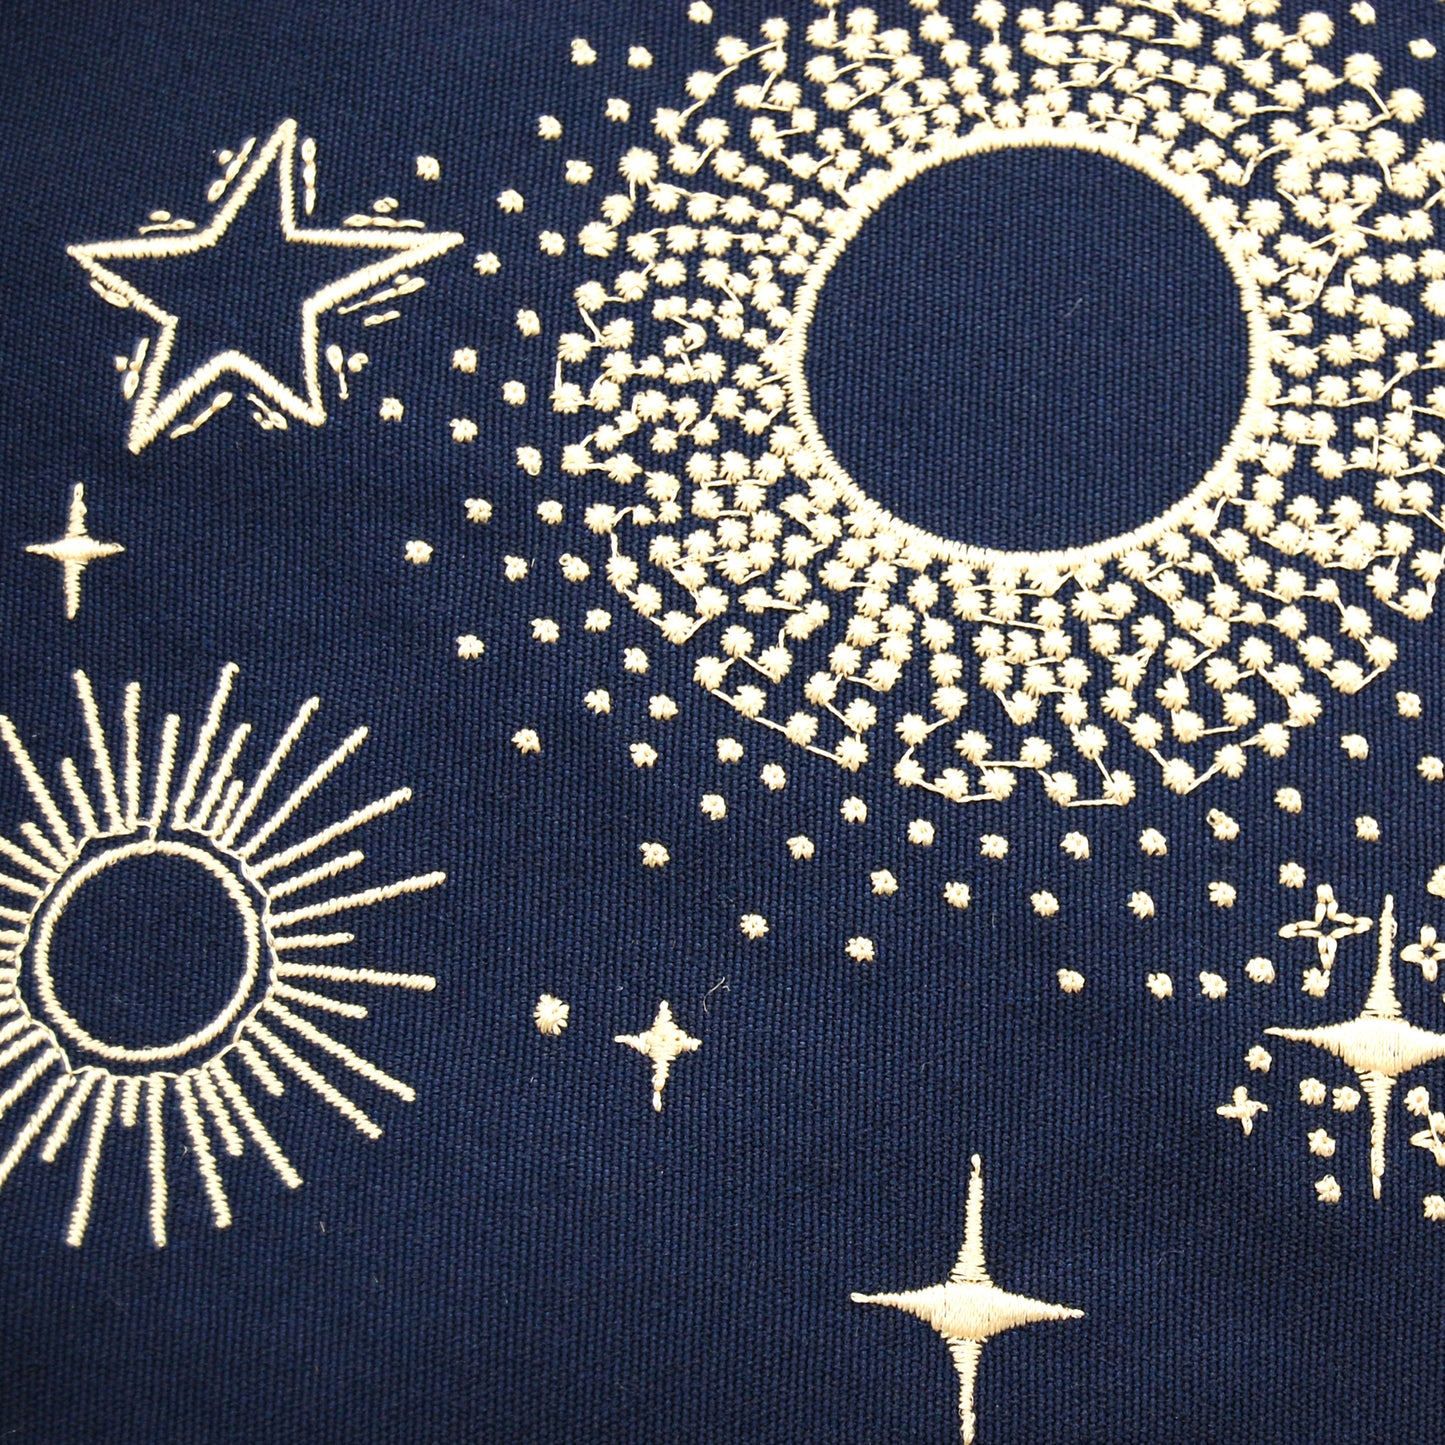 Detail shot of the embroidered stars on the Cape Series Stormy Seas pillow.